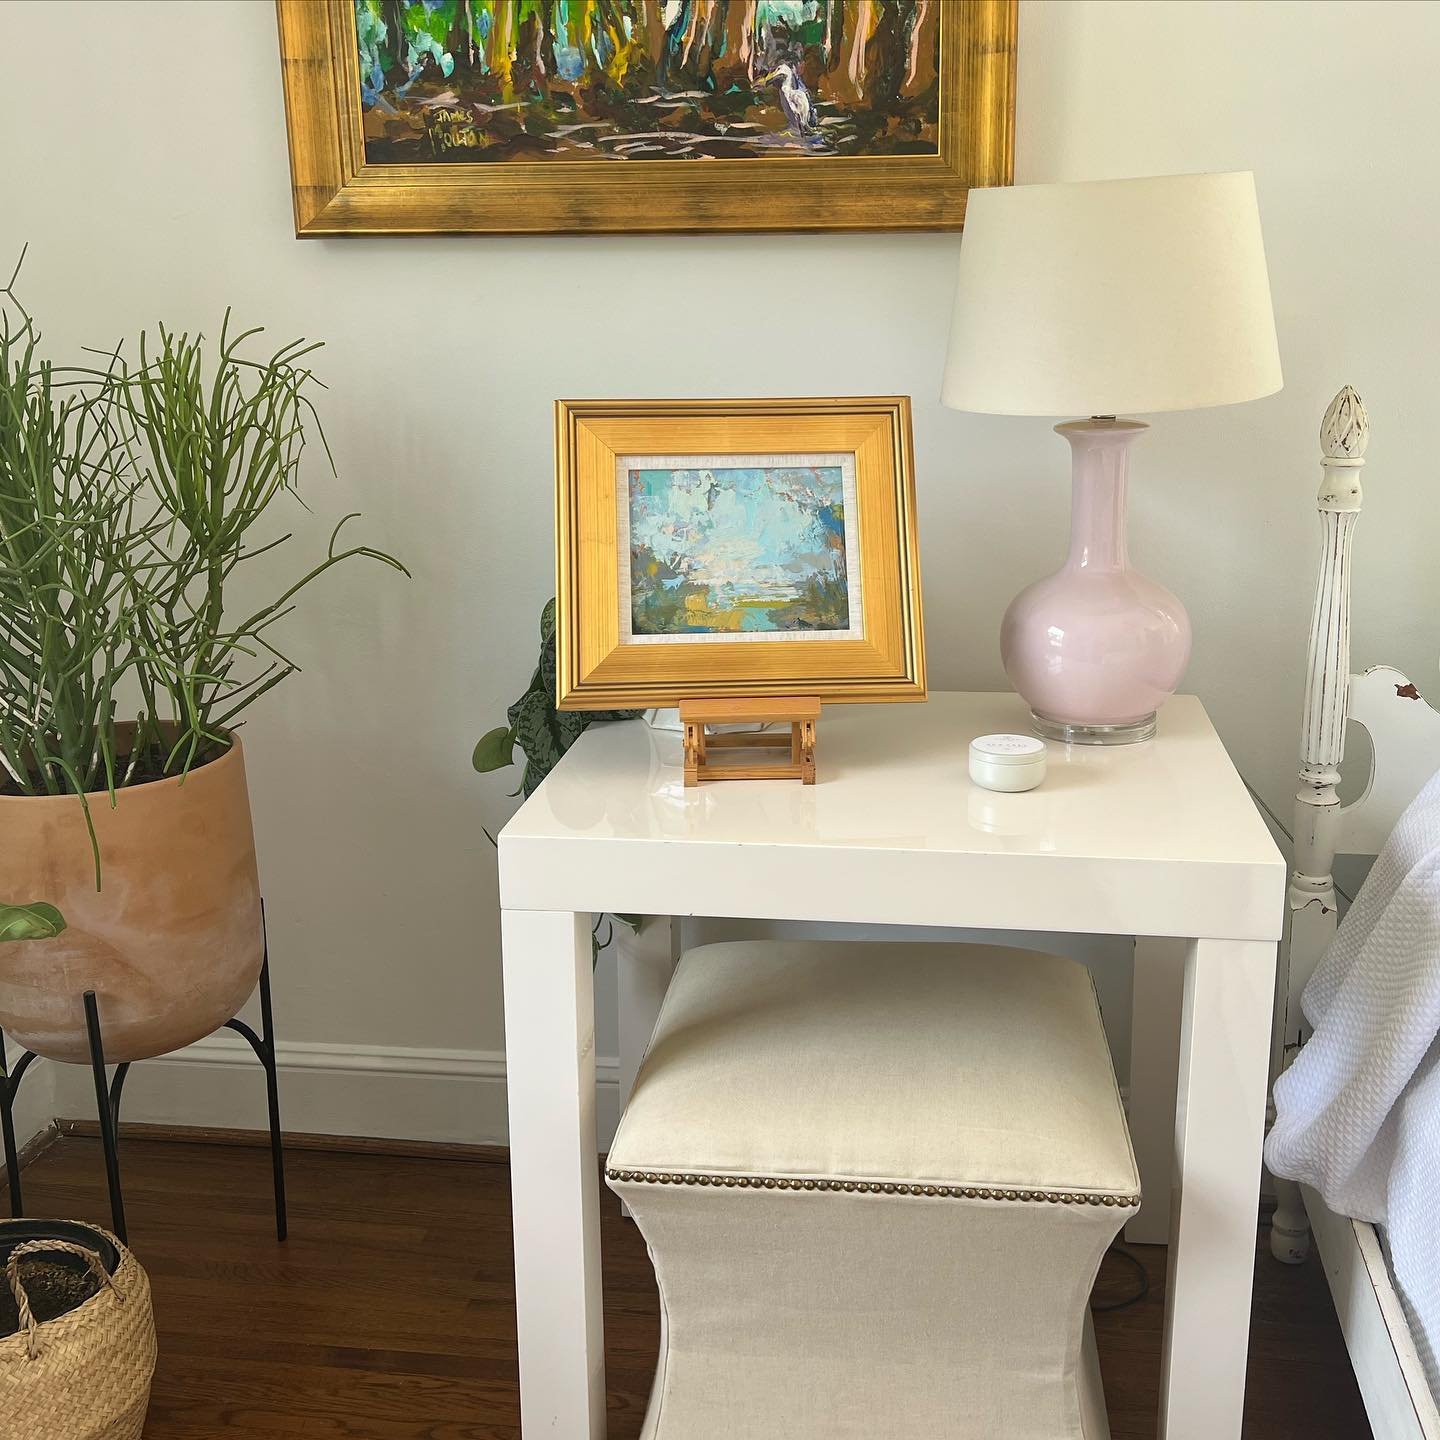 This sweet little abstract landscape, &ldquo;Happy Day&rdquo;, sold last night at the Midwood Home &amp; Garden Tour, where 15 of my paintings are displayed at 2020 Winter Street. Thank you, @millycort, for sharing your beautiful space! 

The home to